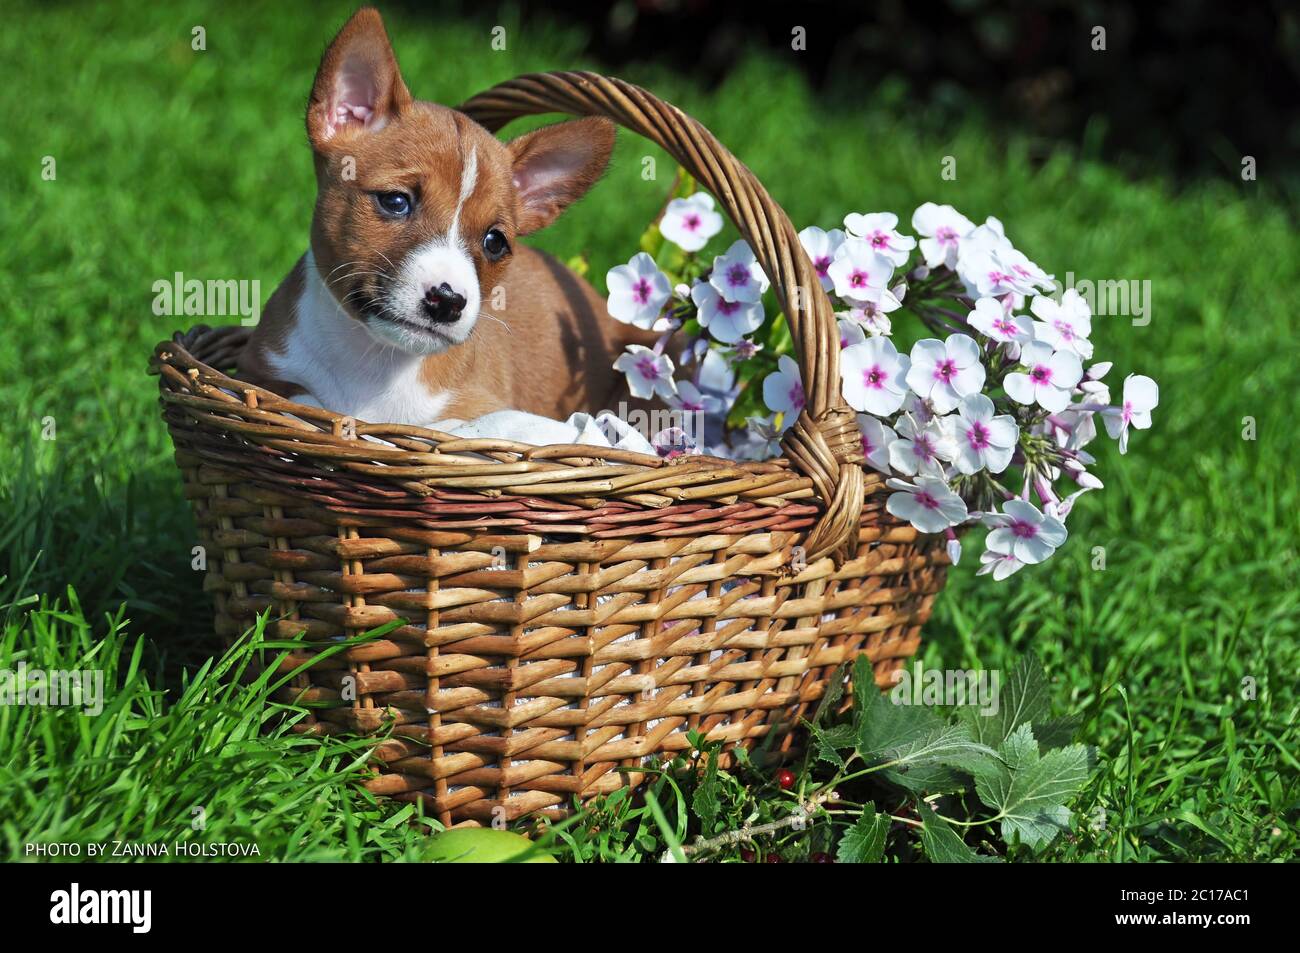 nice red Basenji dog puppy in the basket outside Stock Photo